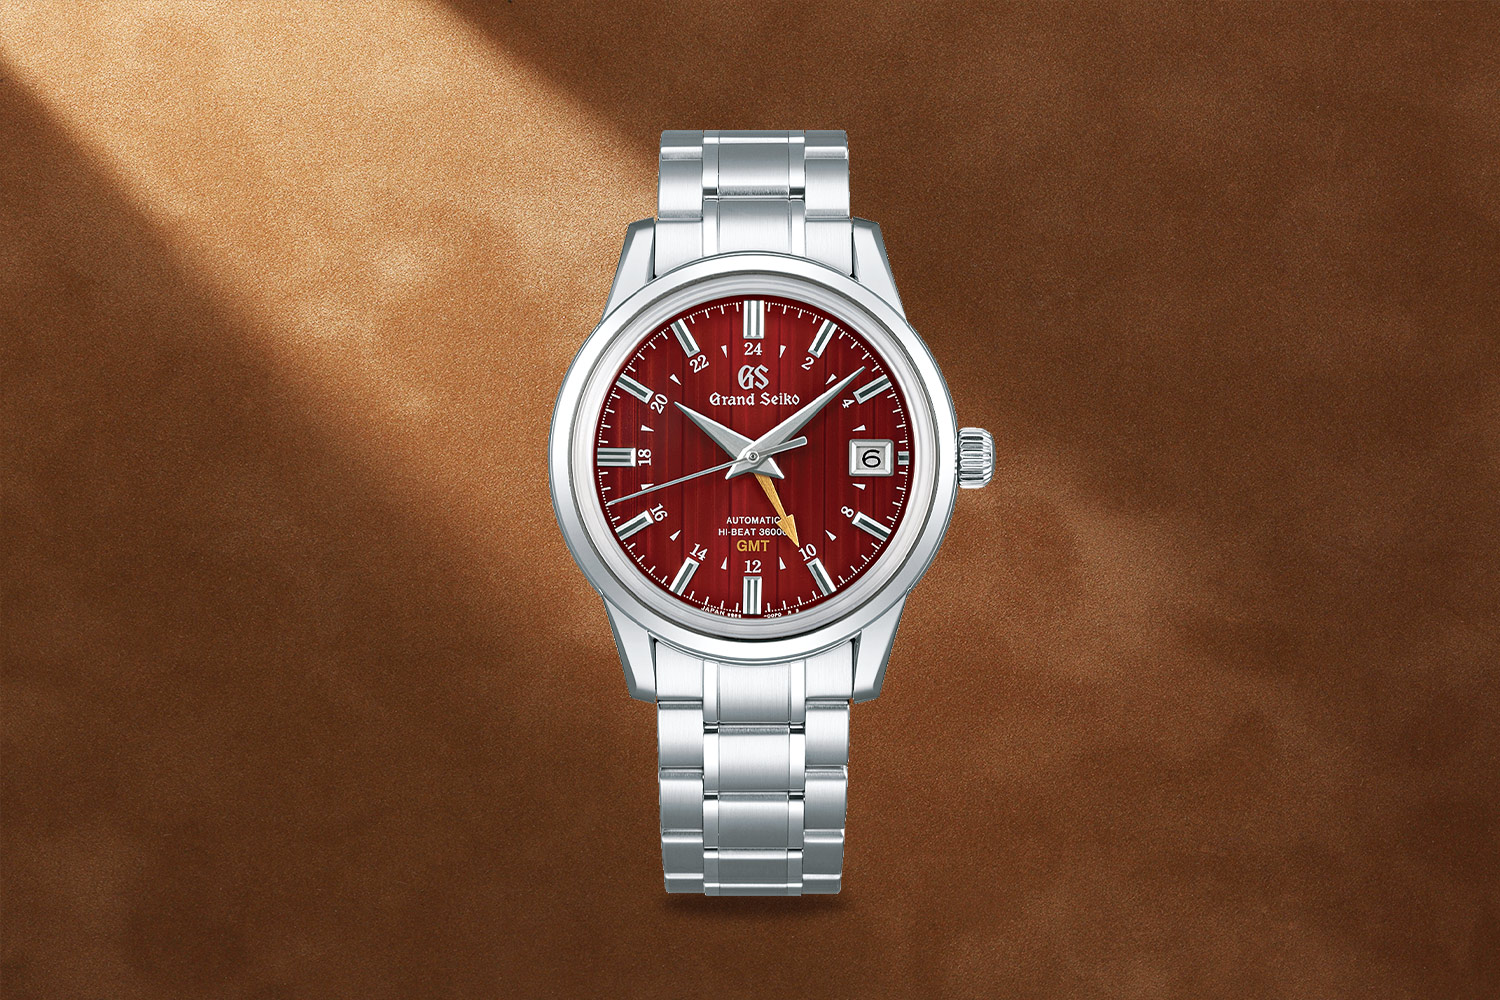 Silver watch with a red face